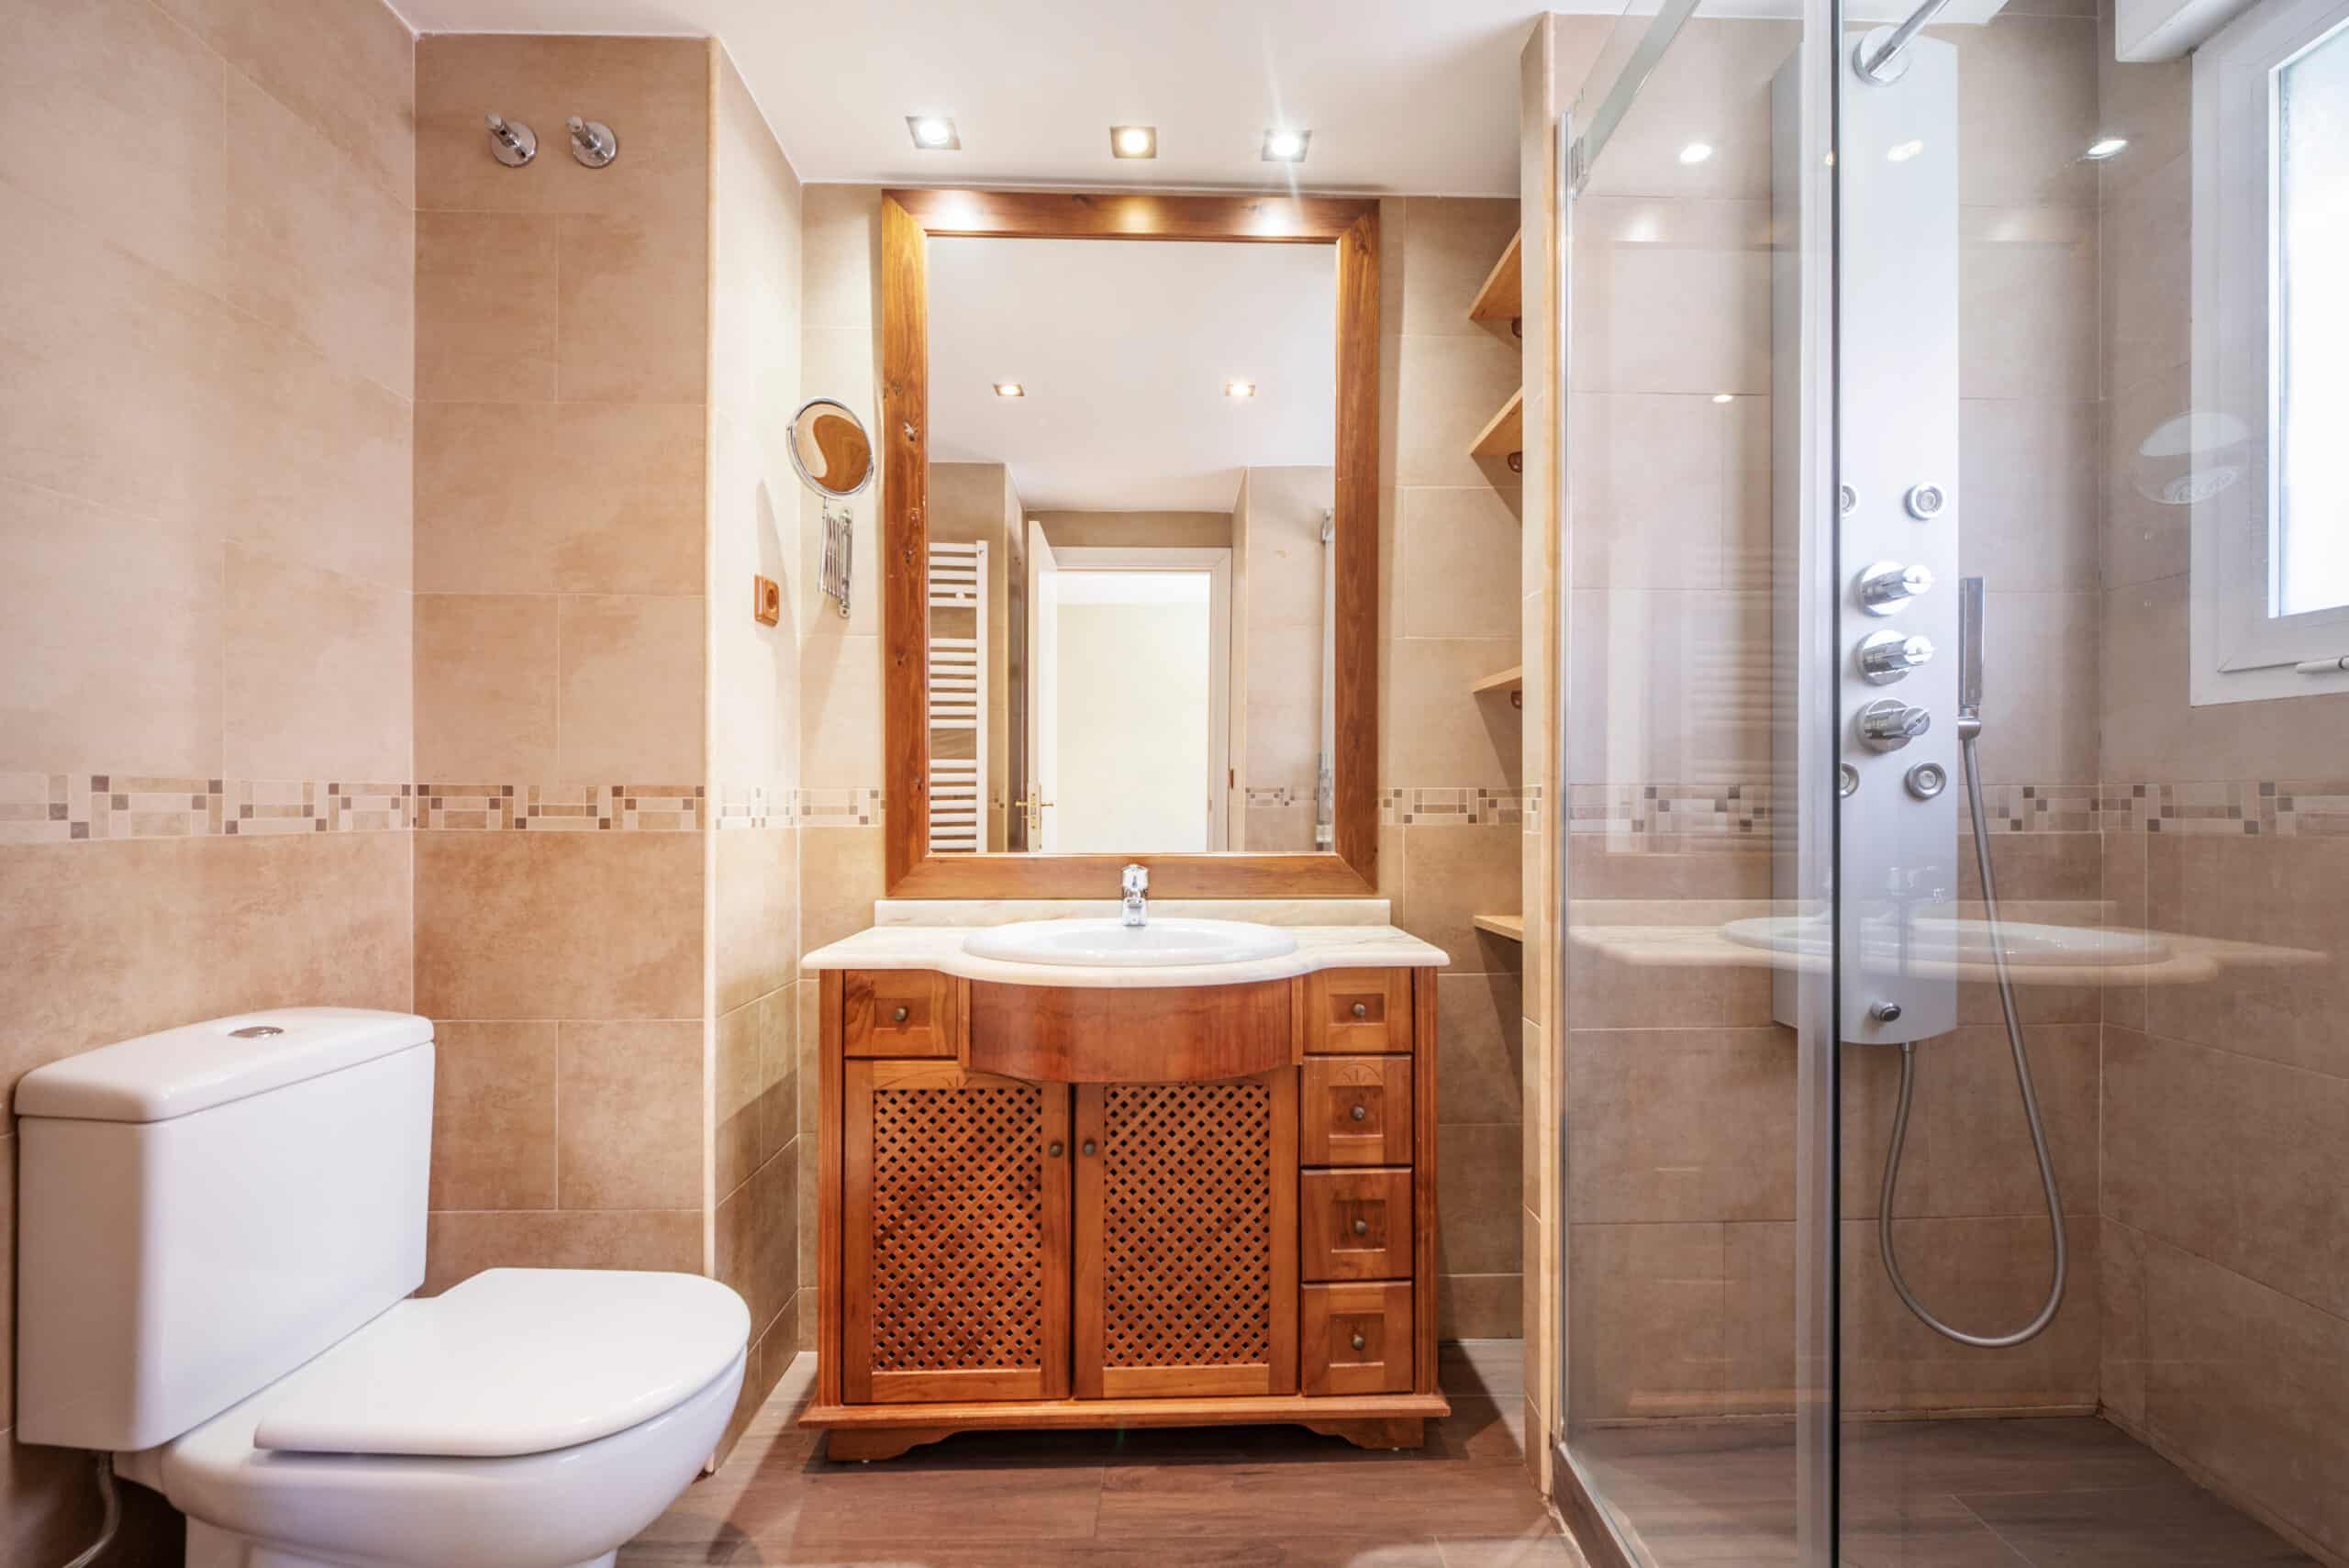 Classic, yet elegant bathroom style with wood vanity, a toilet, and an enclosed shower with a steam jet shower